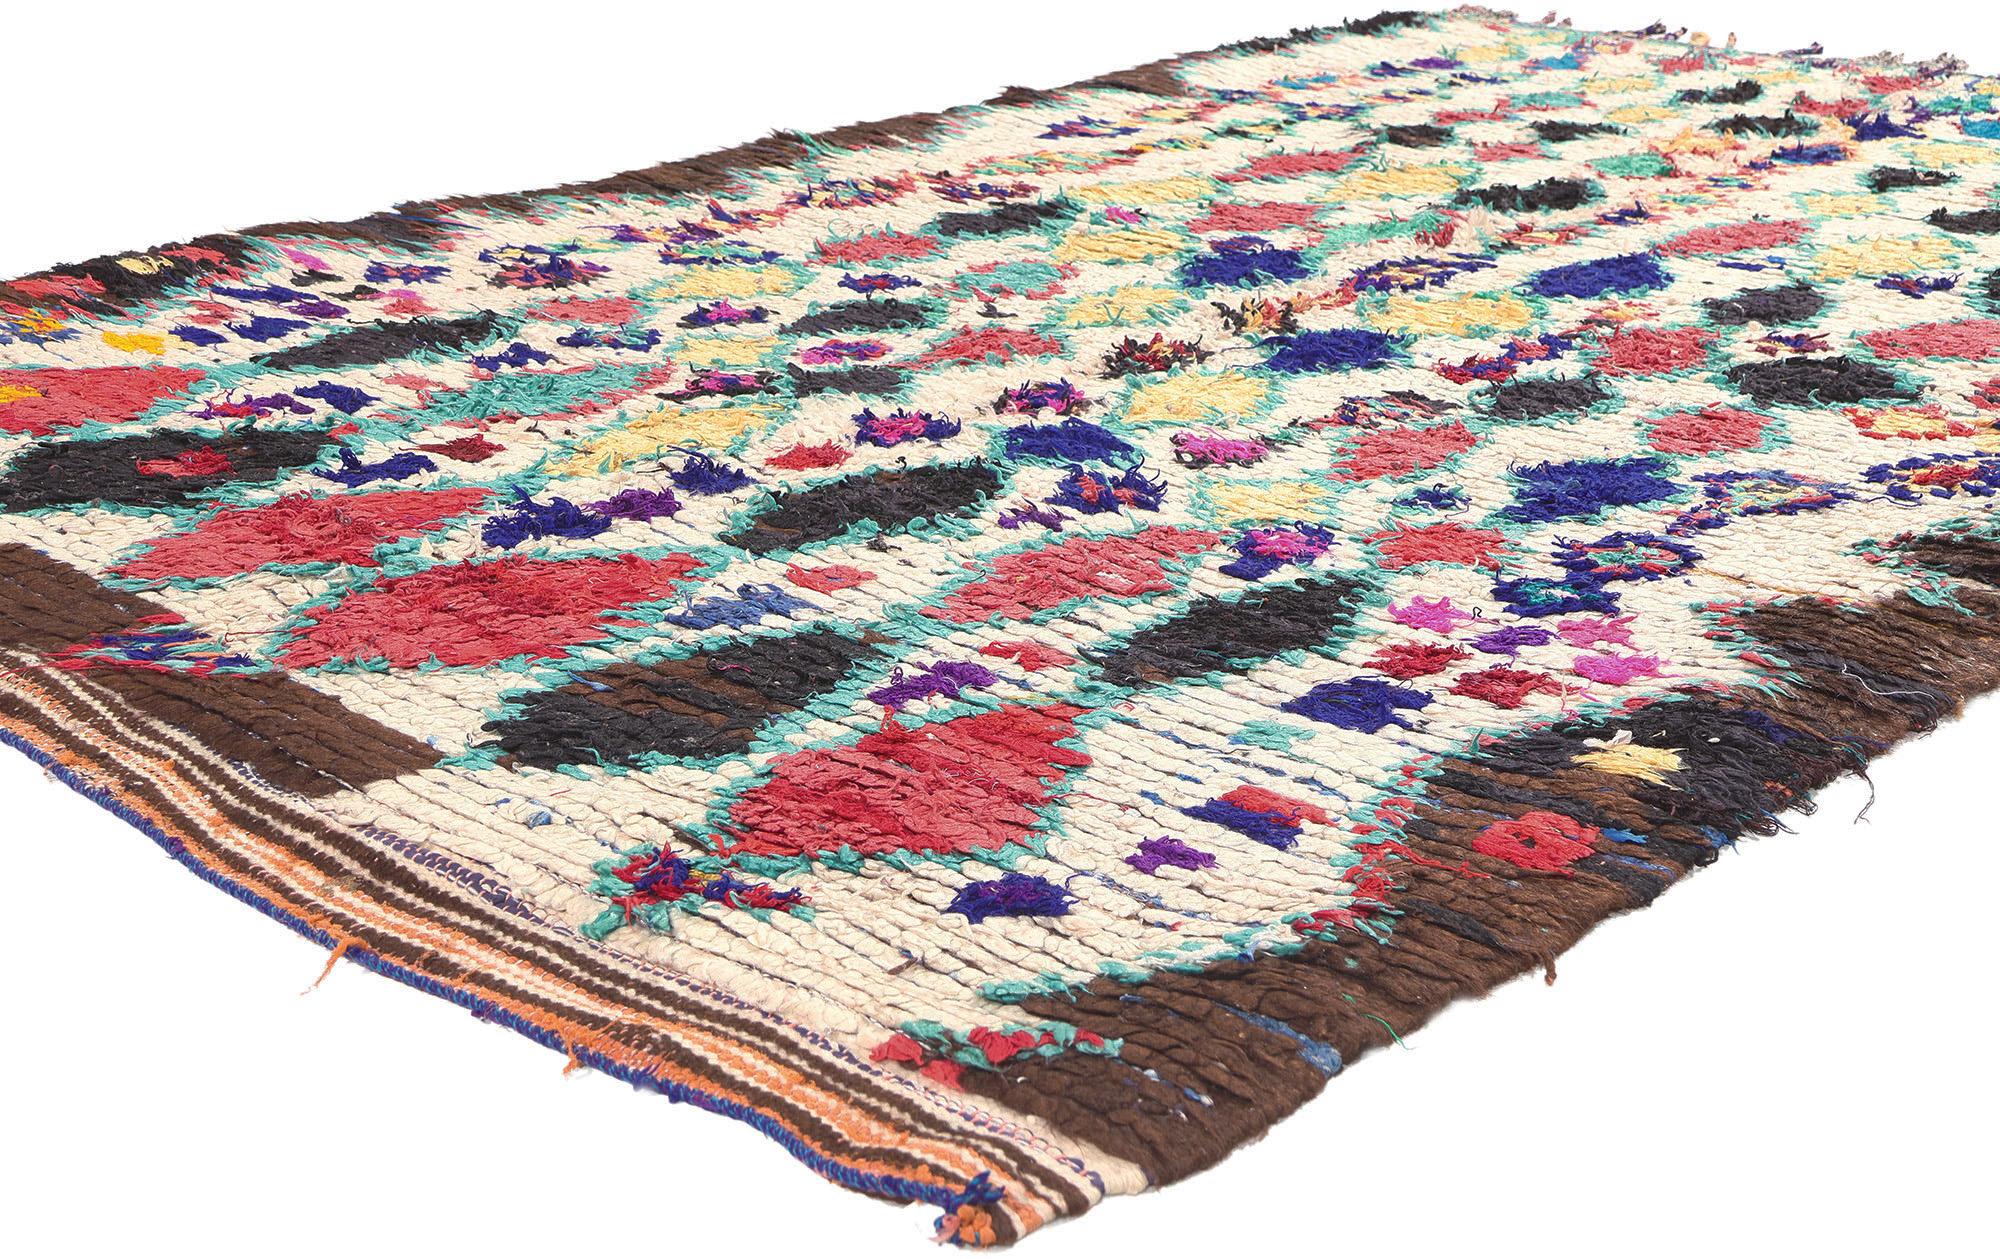 20375 Vintage Boucherouite Moroccan Azilal Rag Rug, 04'11 x 08'03. 

Crafted through the age-old tradition of hand-knotting, this vintage Boucherouite Moroccan rag rug emanates from the skilled hands of The Berber Tribes in the Azilal Region,